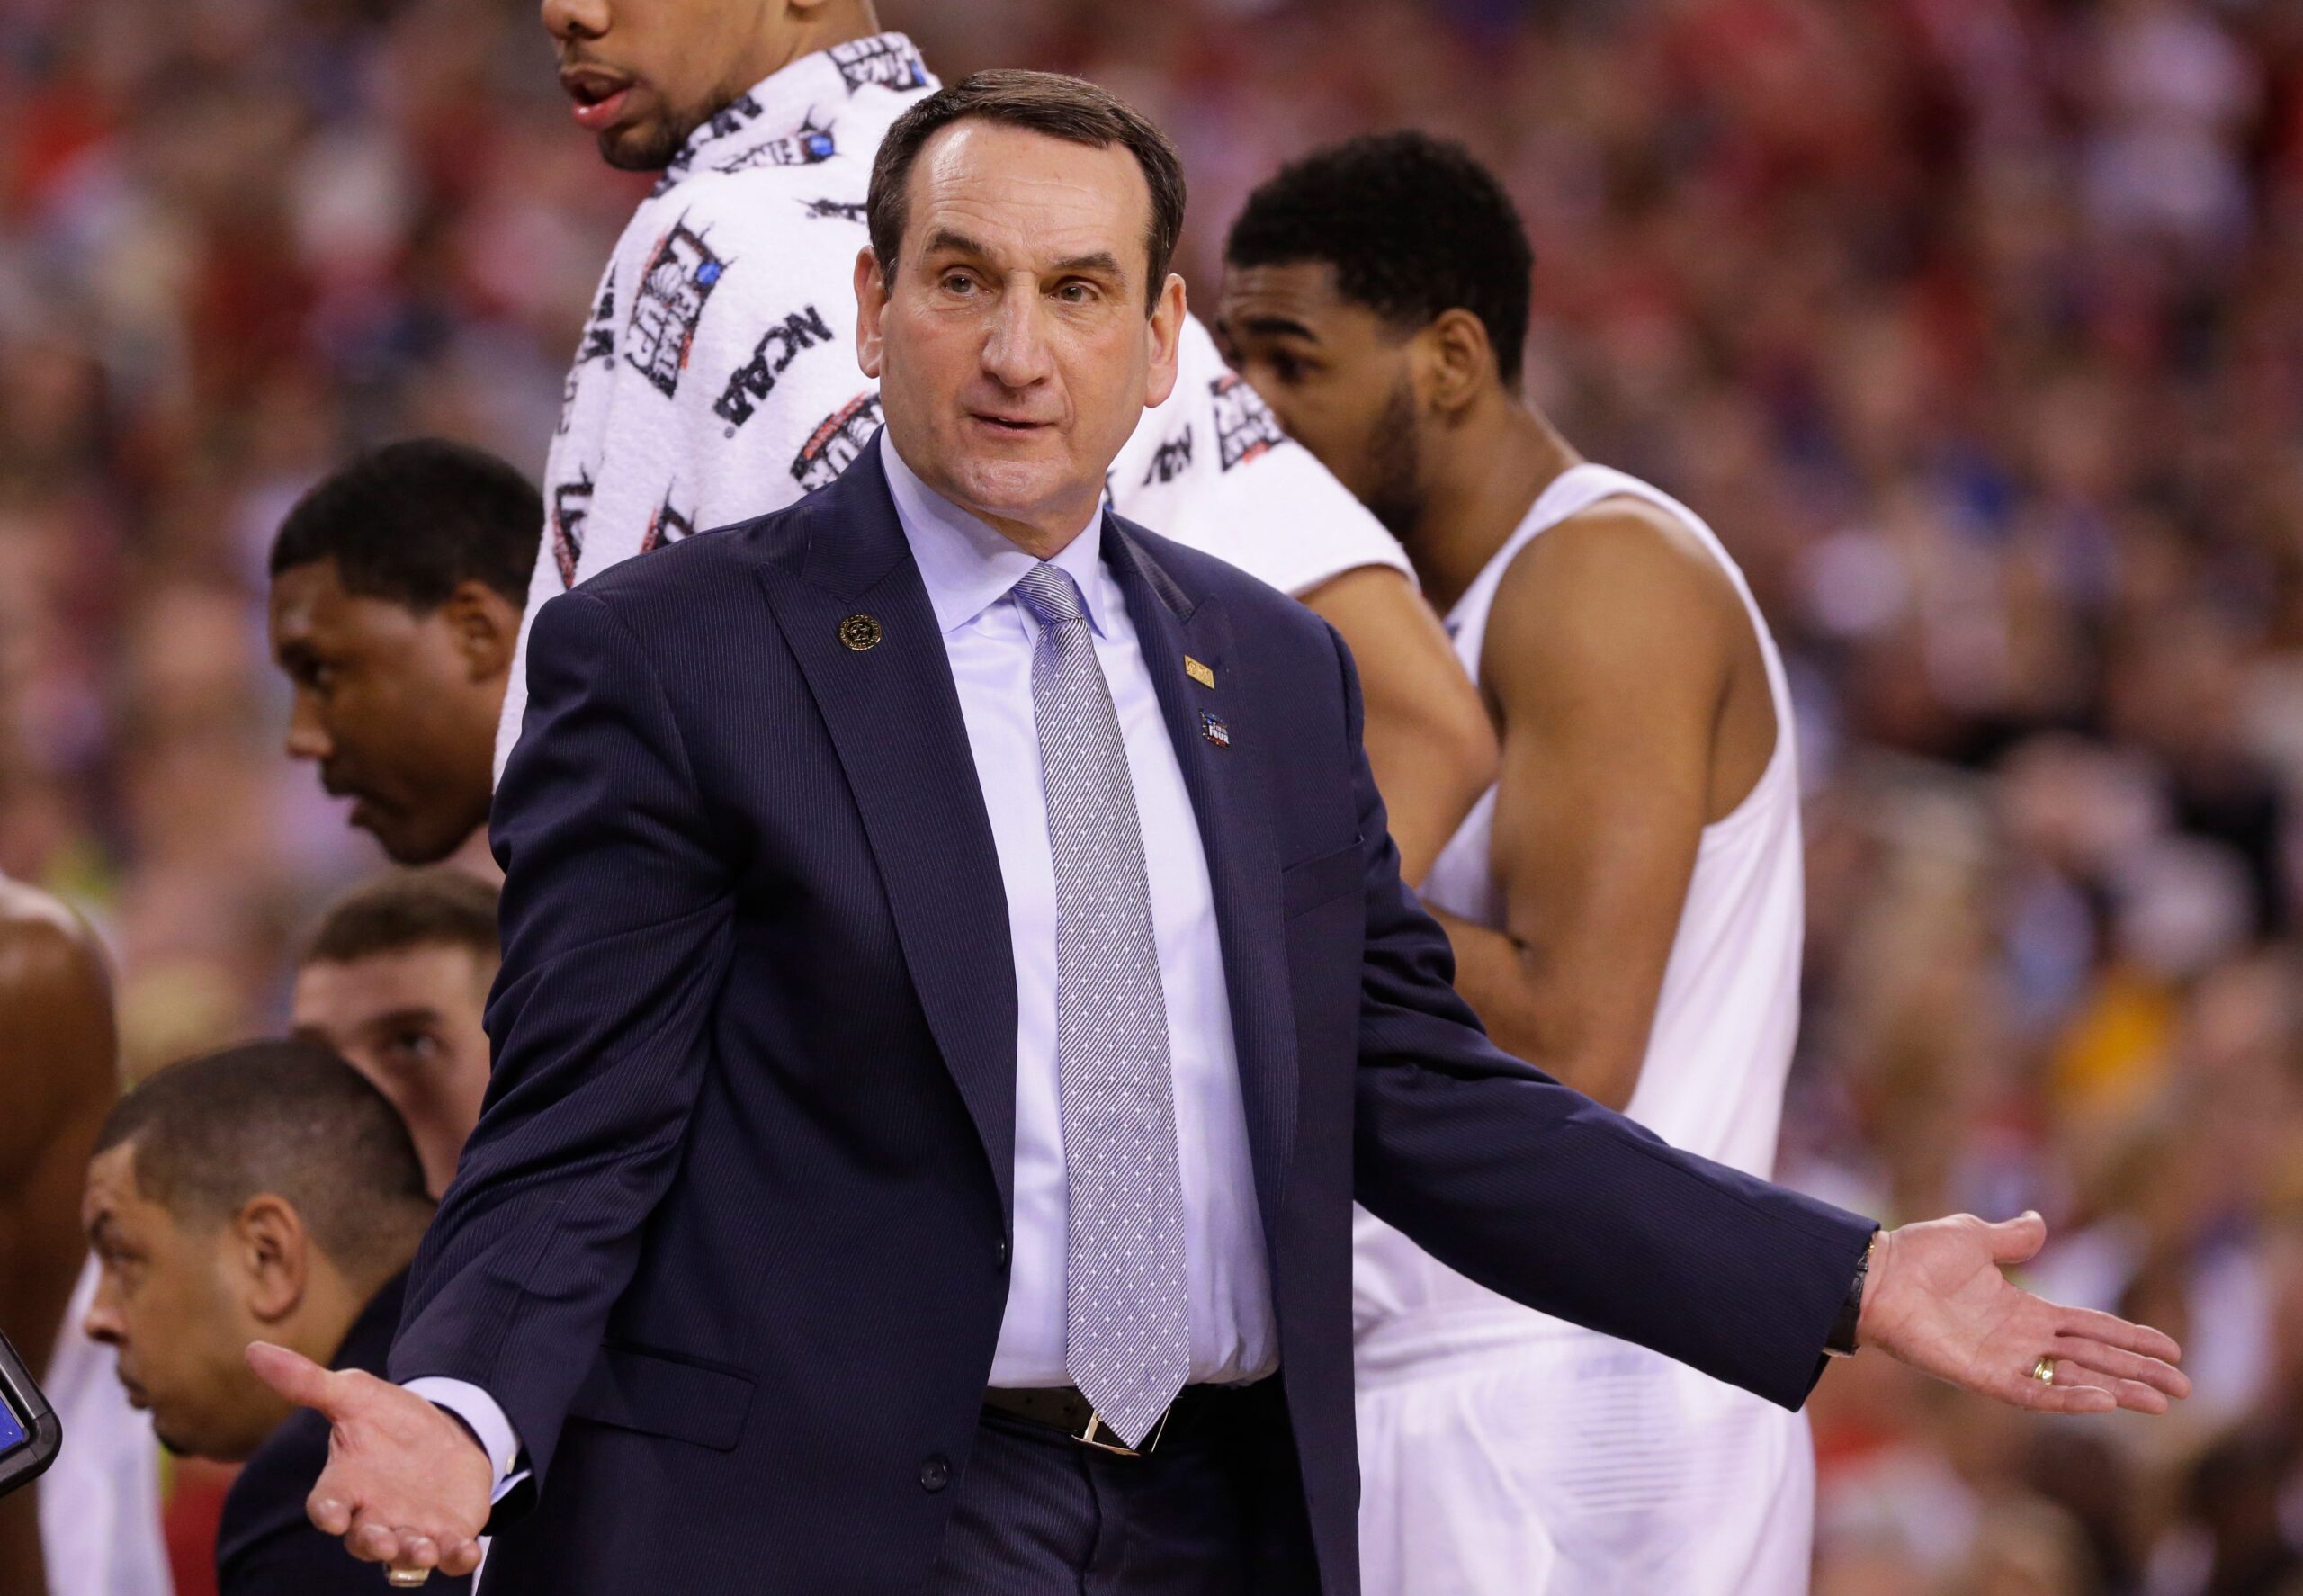 Duke head coach Mike Krzyzewski argues a call during first half of their NCAA Final Four college basketball tournament championship against Wisconsin Monday, April 6 2015 at Lucas Oil Stadium in Indianapolis, Ind.